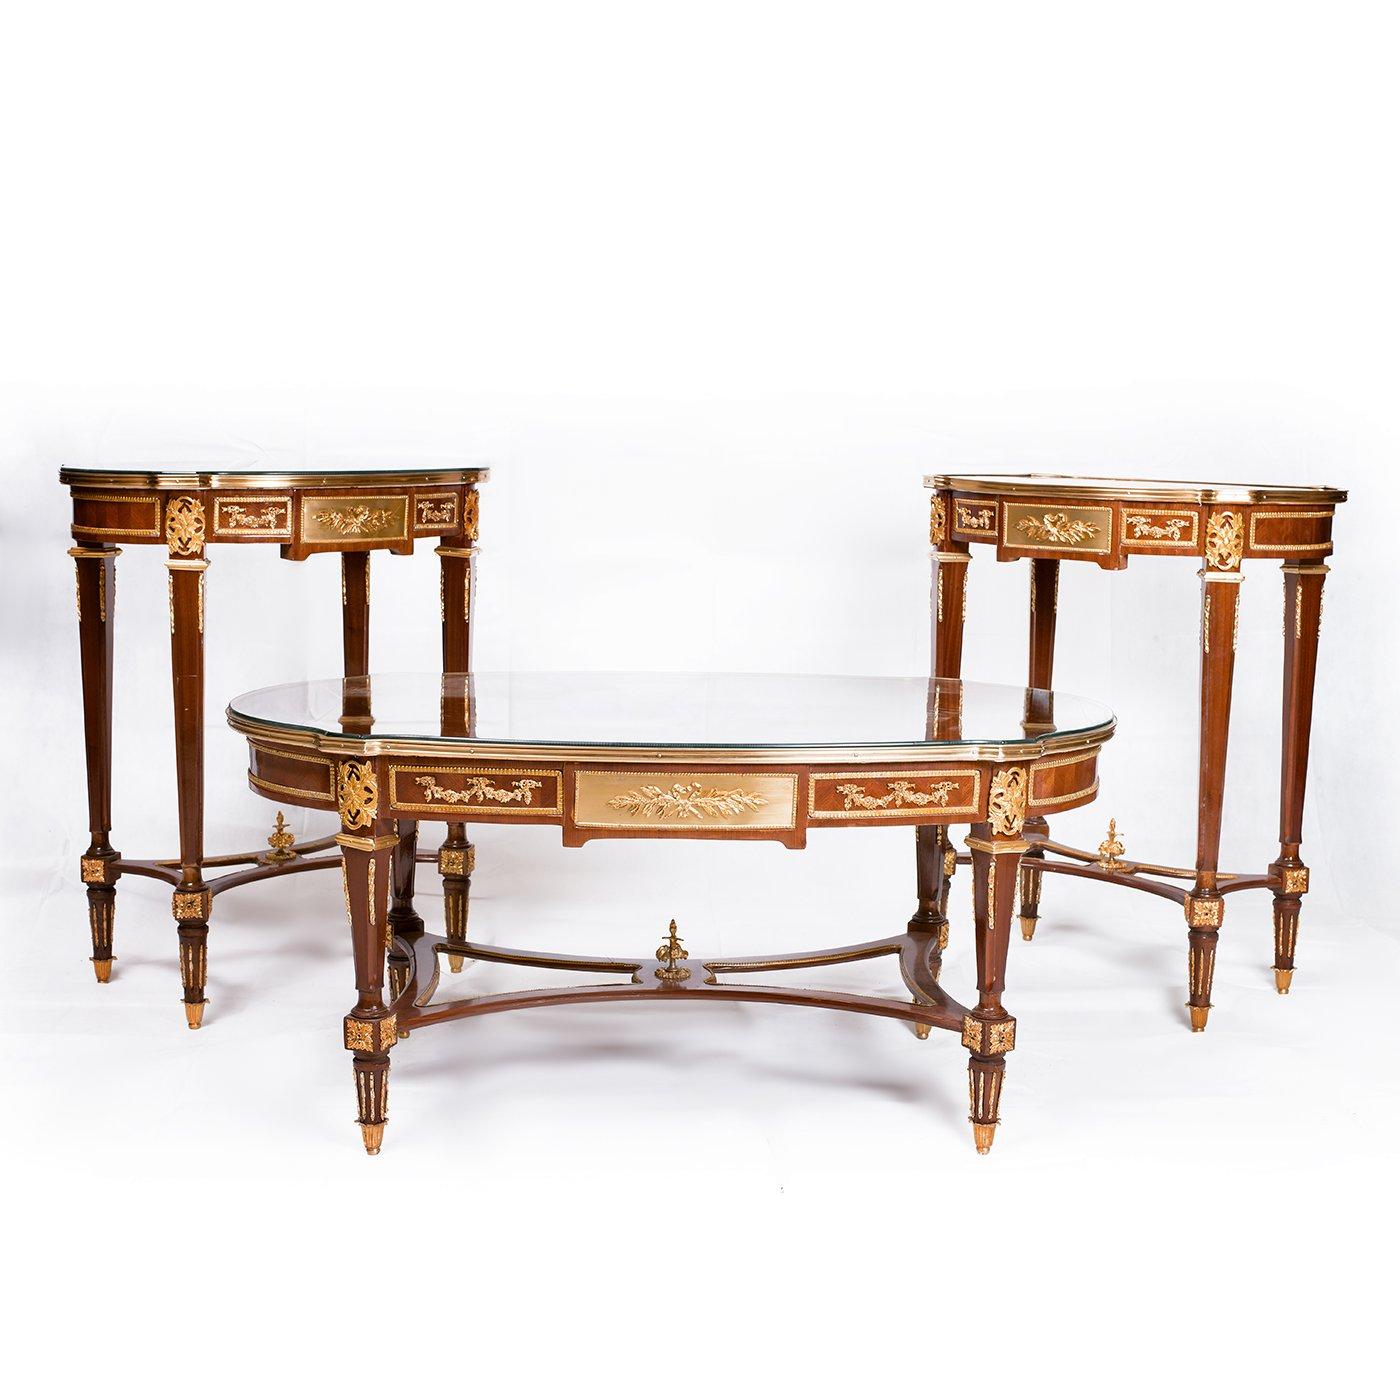 A beautiful French Louis XVI marquetry inlaid table (3 set), 20th century.

Superior Louis XVI style gilt-bronze and marqueterie inlaid table set made of beechwood, center table and pair of side tables, decorated with relief raised brass ornament